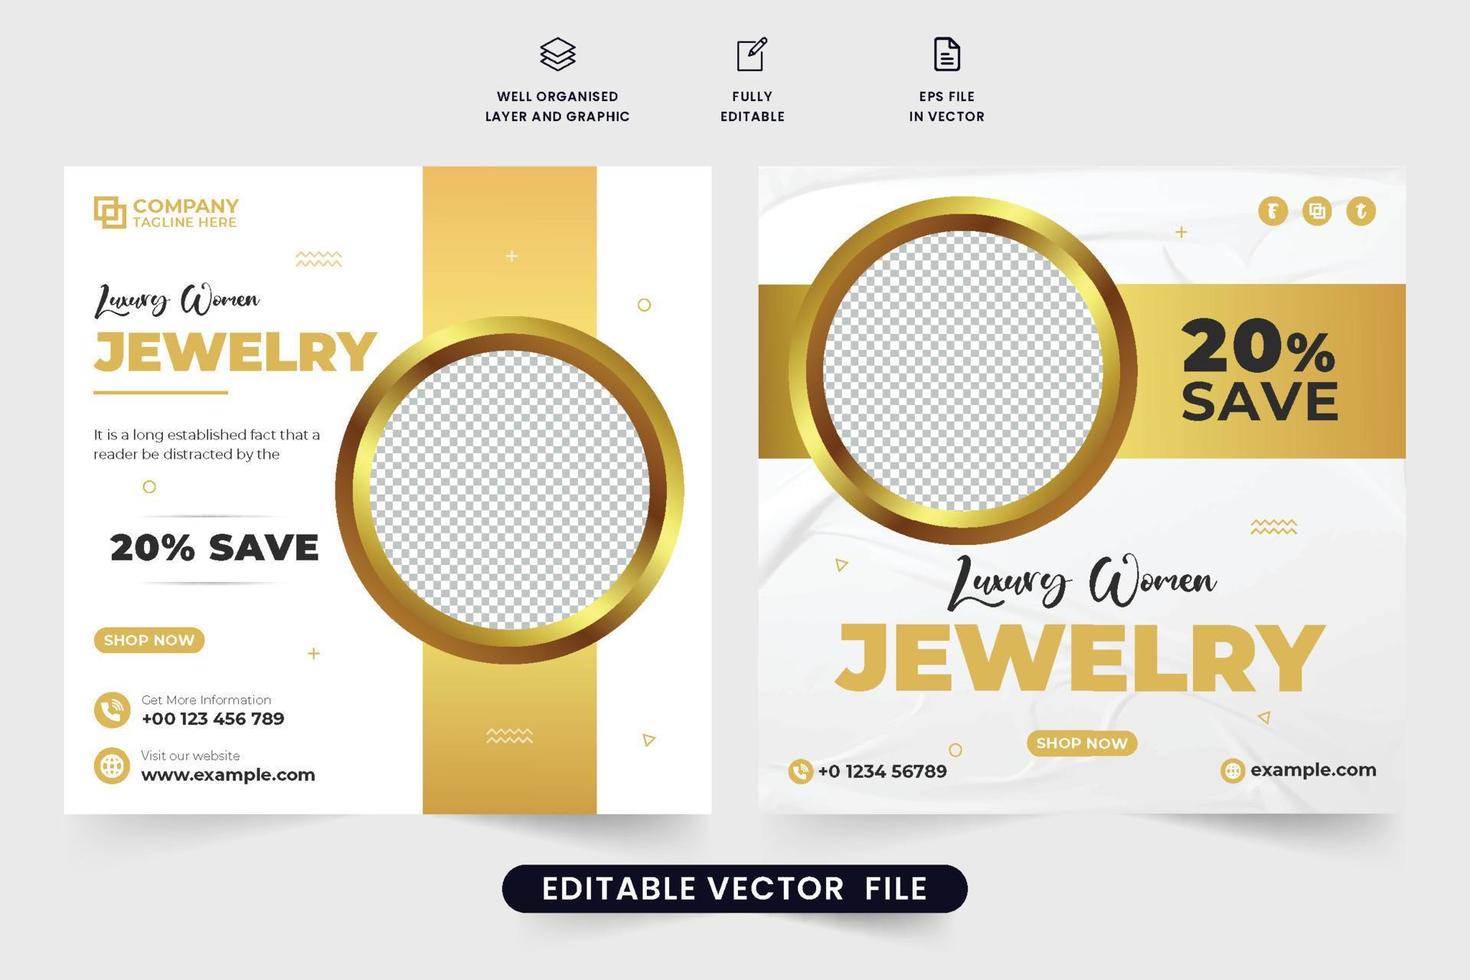 Jewelry business advertisement template vector for social media marketing. Special jewelry store promotion poster design with golden and dark colors. Women ornaments social media post design.